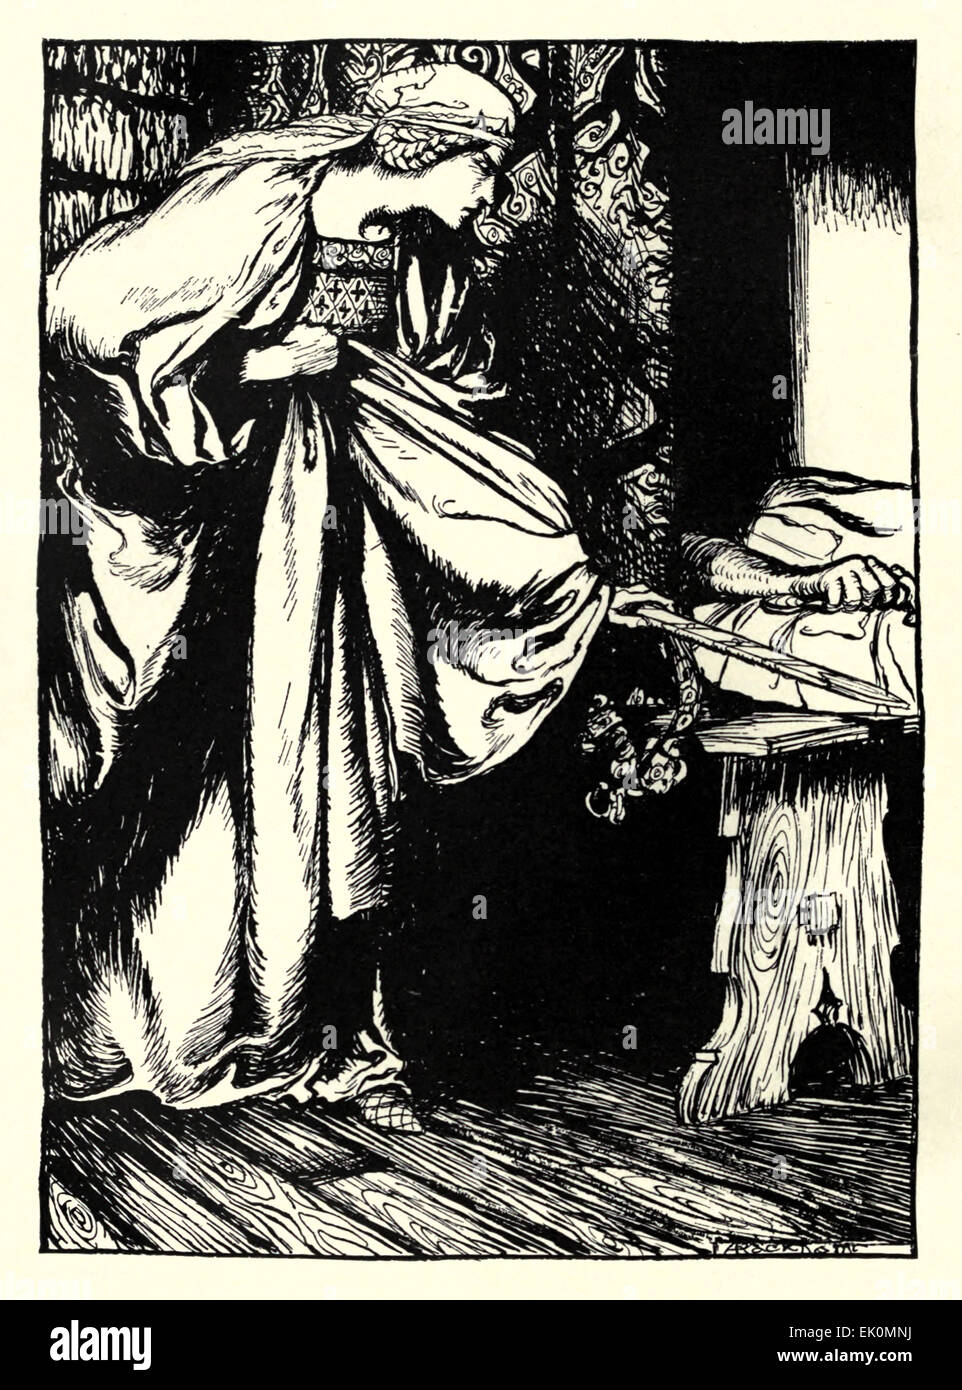 - Illustration by Arthur Rackham (1867-1939) from ‘The Romance of King Arthur and his Knights of the Round Table'. See description for more information. Stock Photo